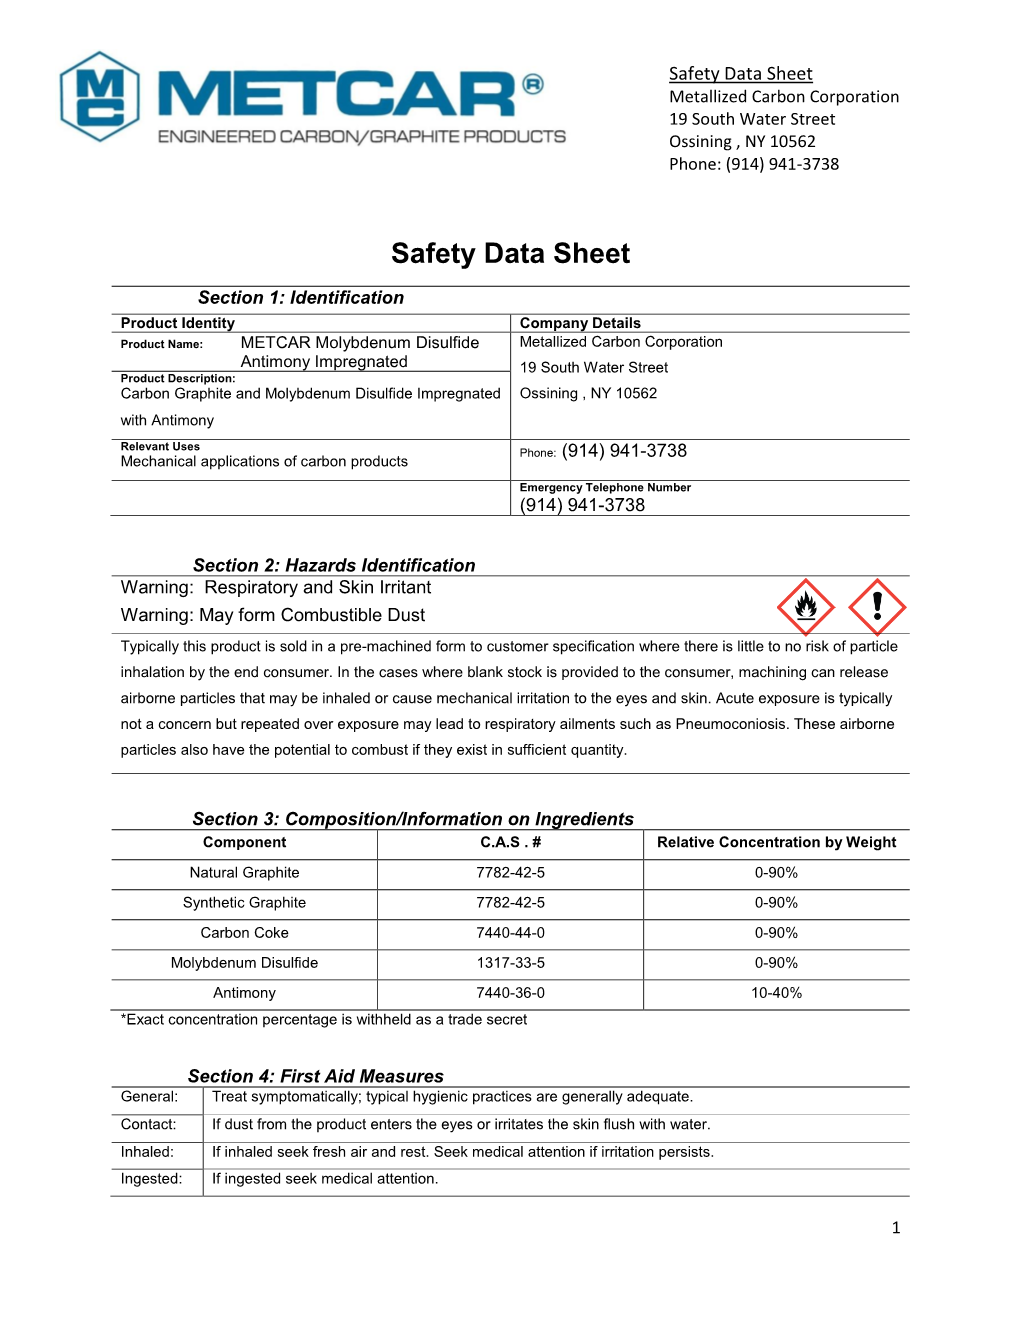 Safety Data Sheet Metallized Carbon Corporation 19 South Water Street Ossining , NY 10562 Phone: (914) 941-3738